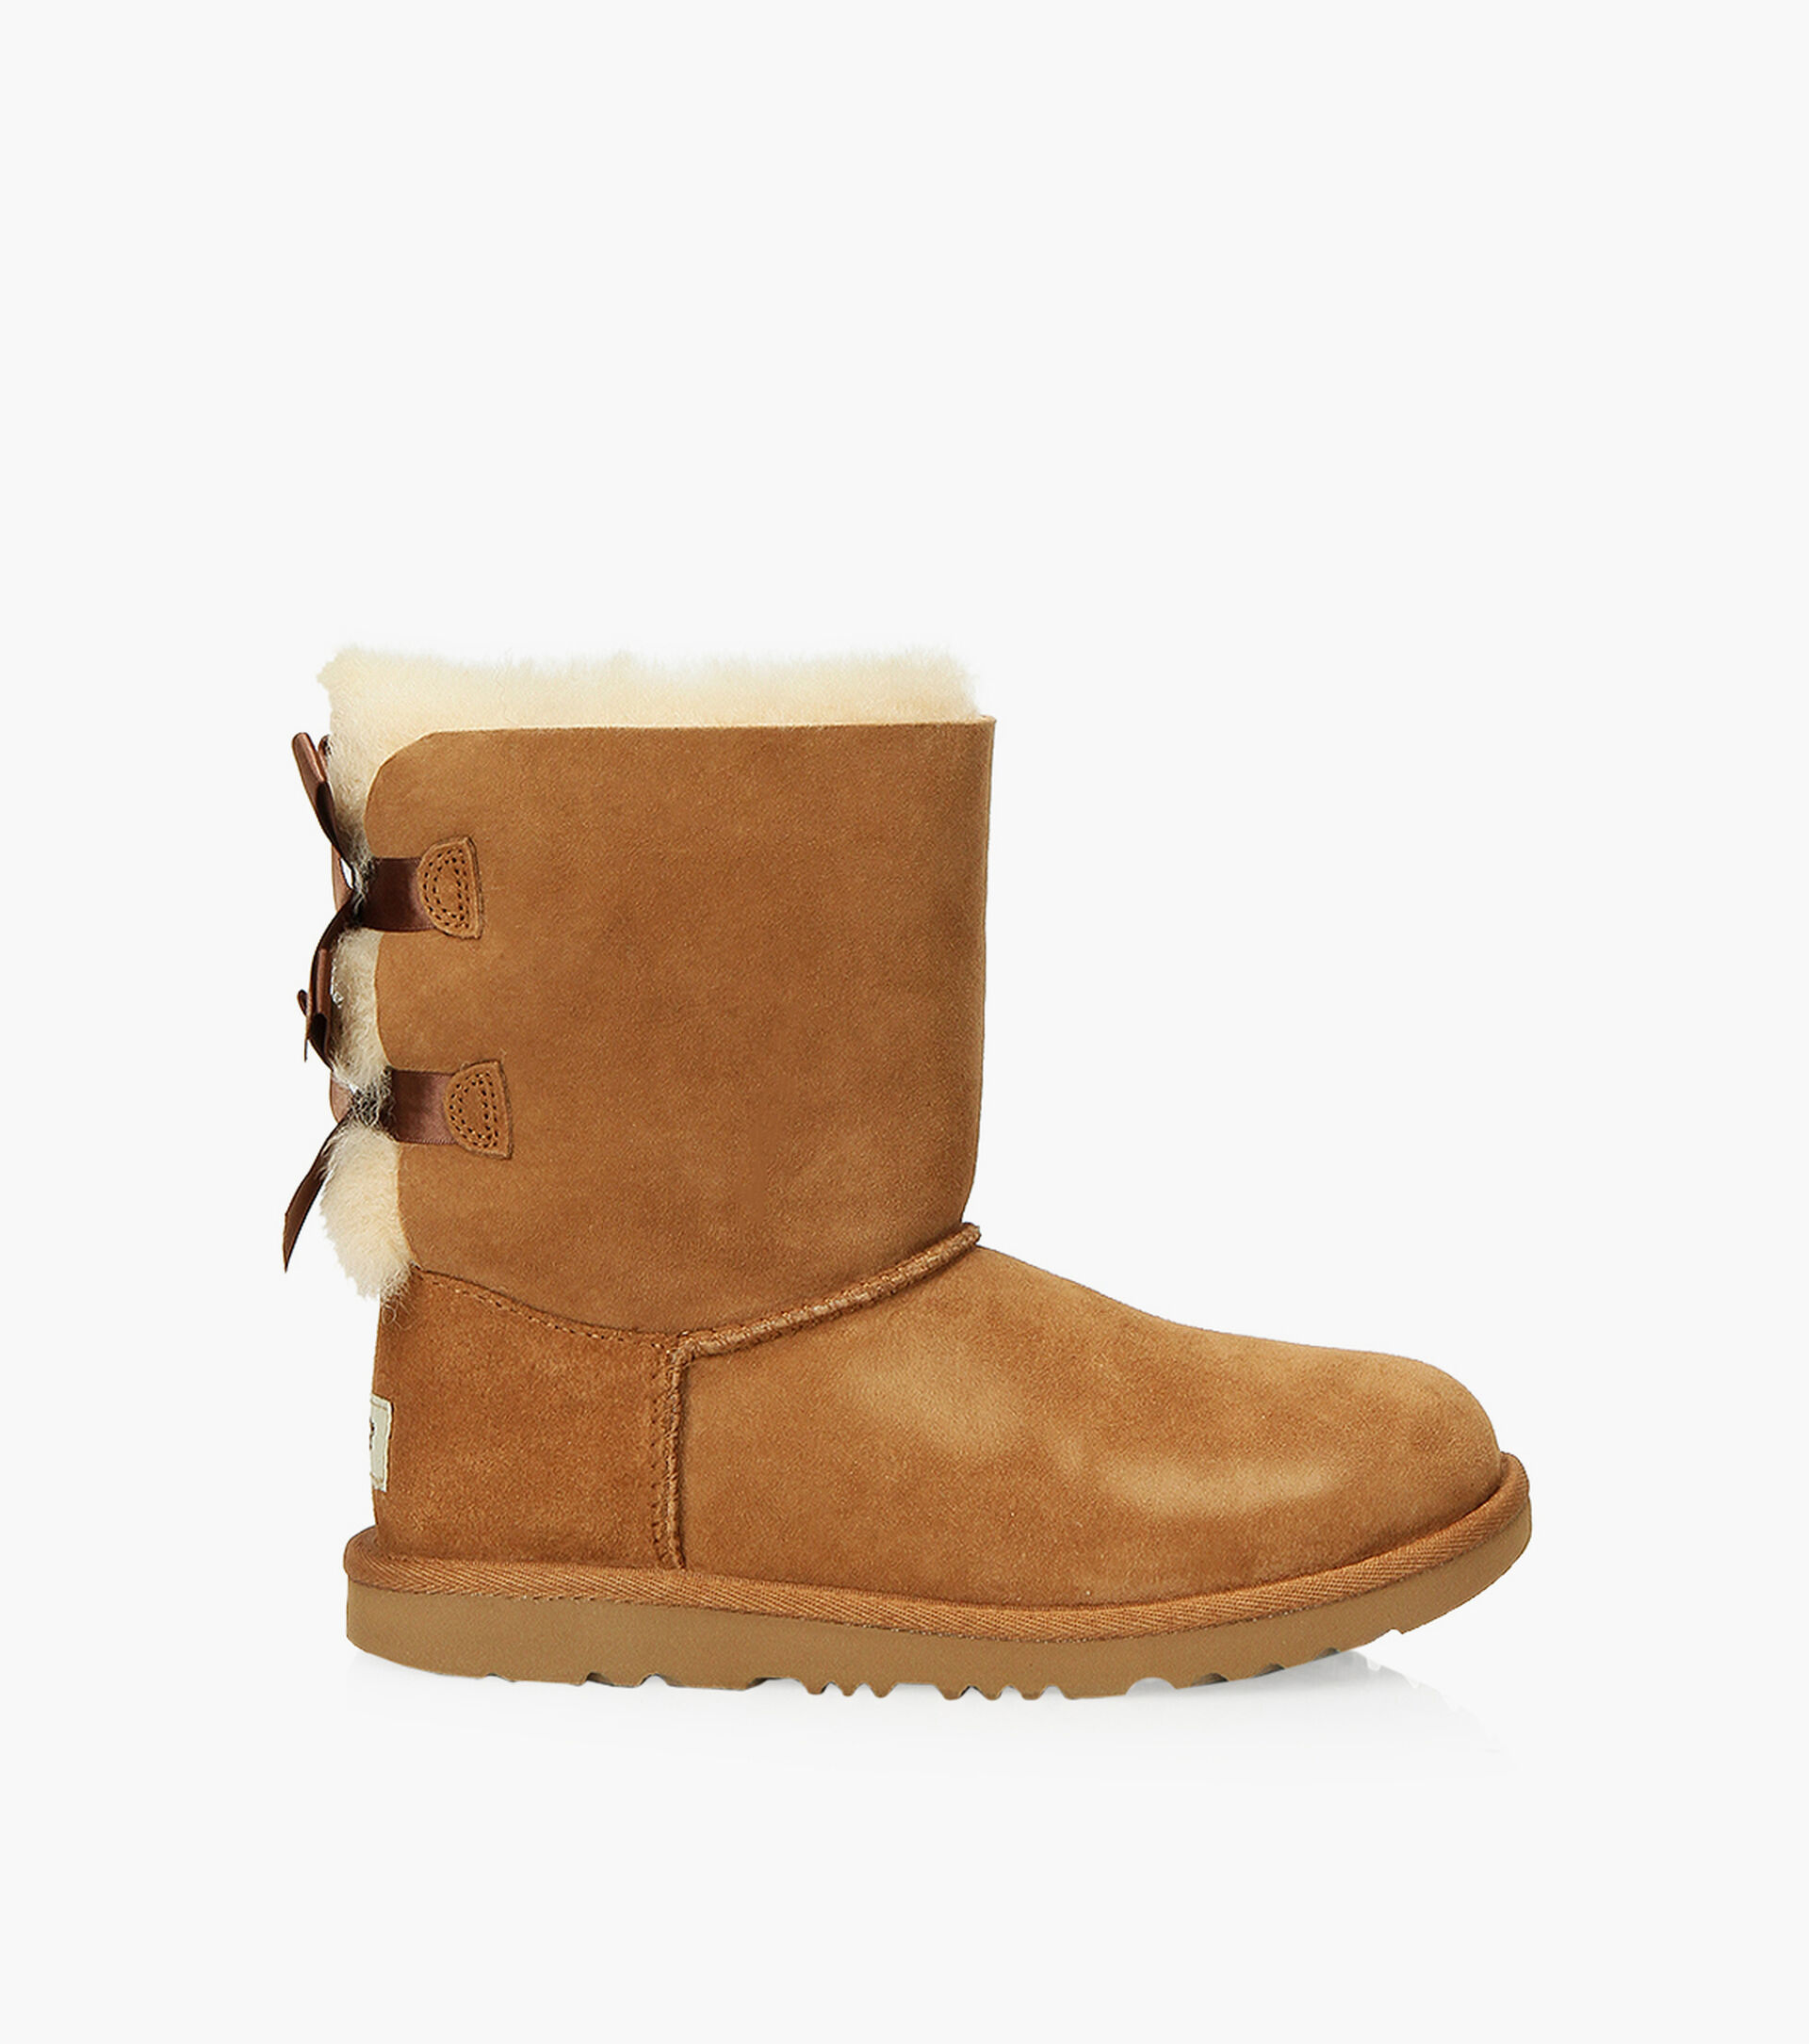 UGG BAILEY BOW II | Browns Shoes